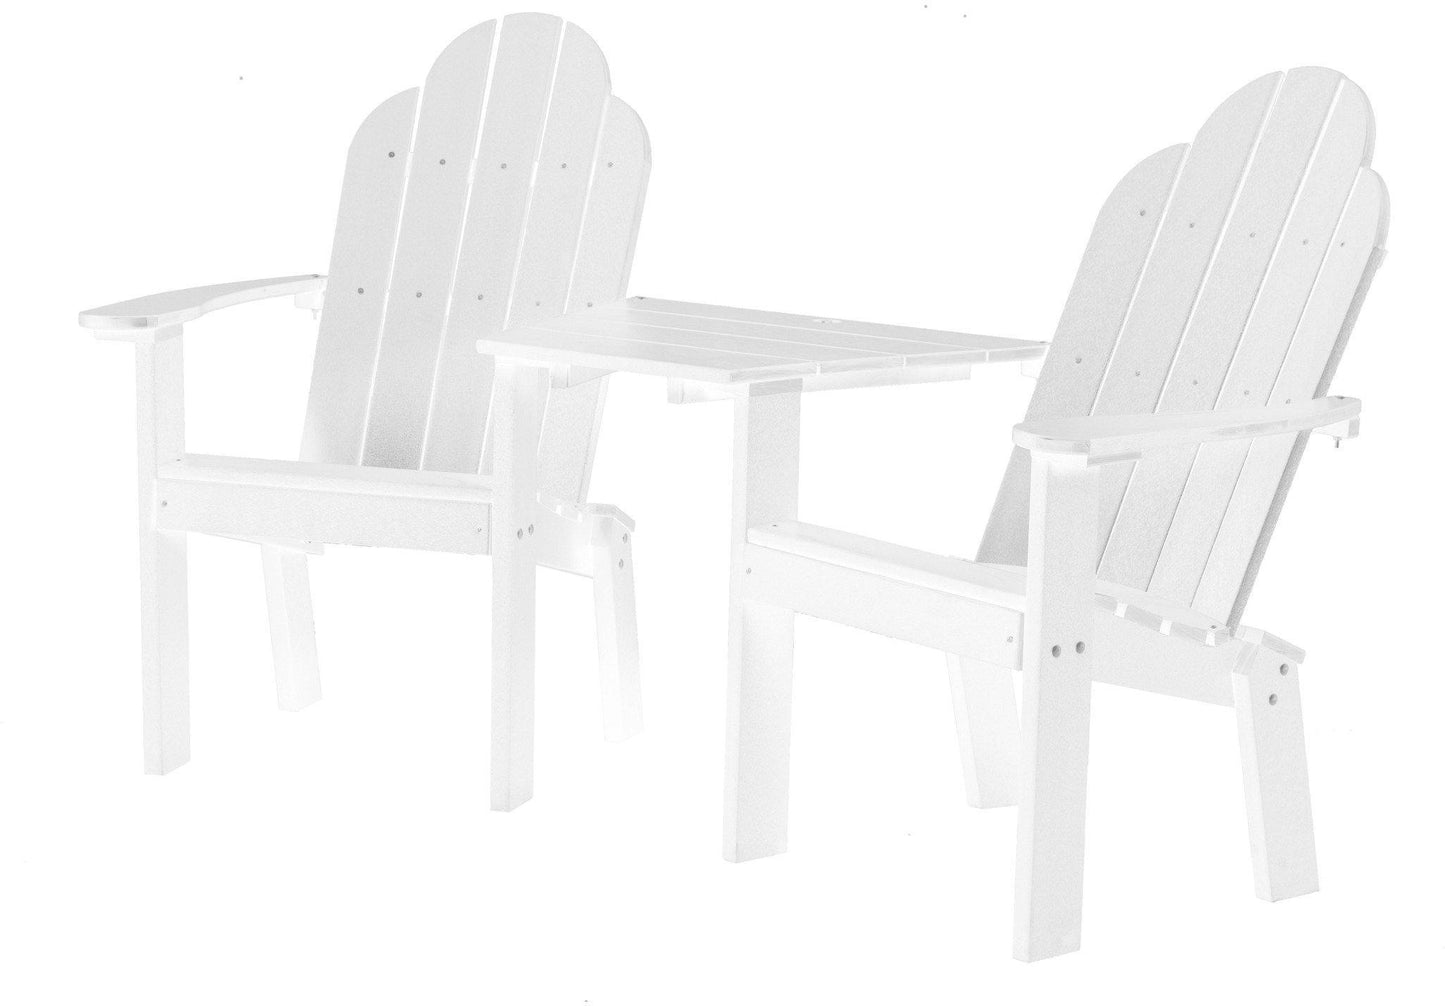 Wildridge Outdoor Recycled Plastic Classic Deck Chair Tete a Tete - LEAD TIME TO SHIP 6 WEEKS OR LESS